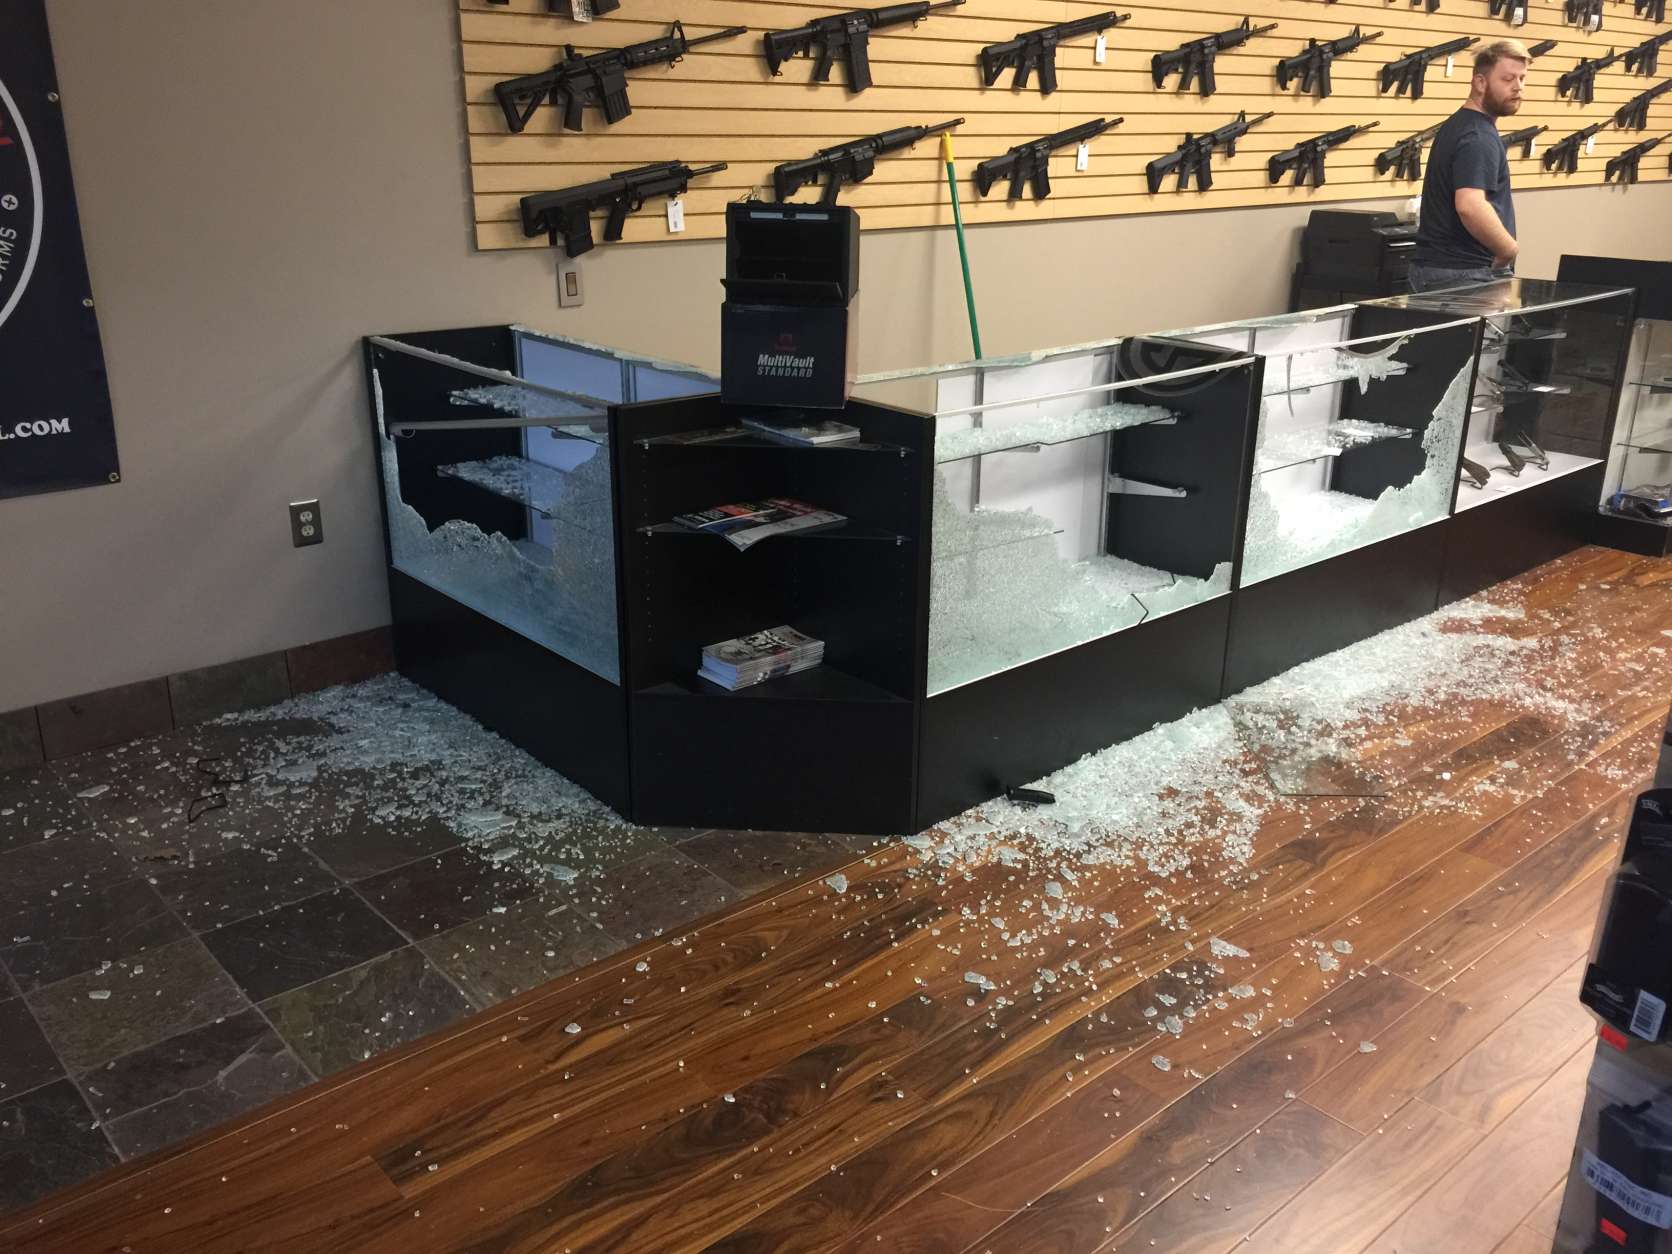 In the March 11 burglary of 
50 West Armory in Chantilly, Virginia, burglars stole 35 semi-automatic handguns in less than a minute.
(Photo courtesy Scott Wahl of 50 West Armory)